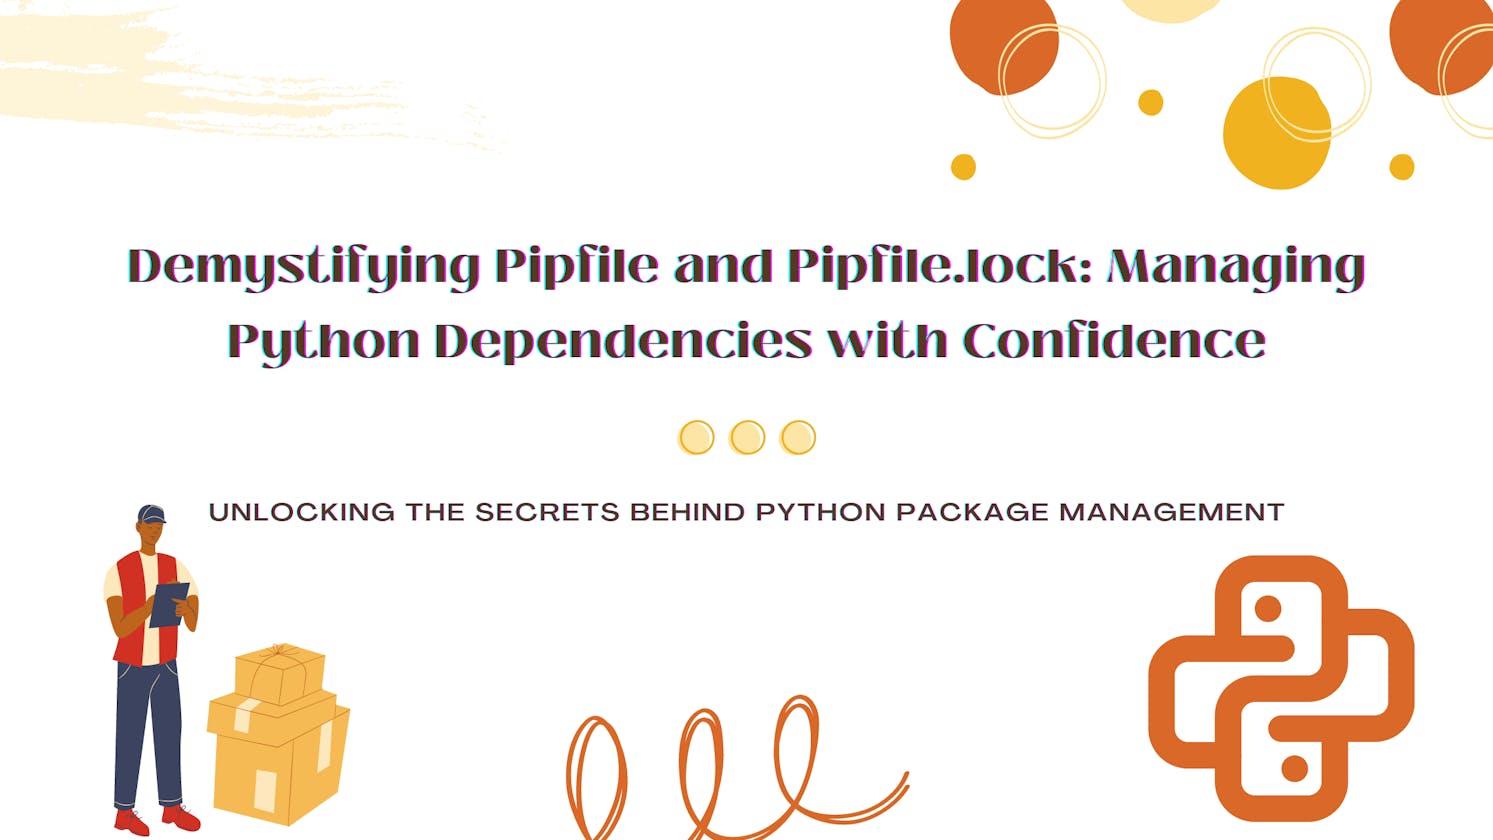 Demystifying Pipfile and Pipfile.lock: Managing Python Dependencies with Confidence